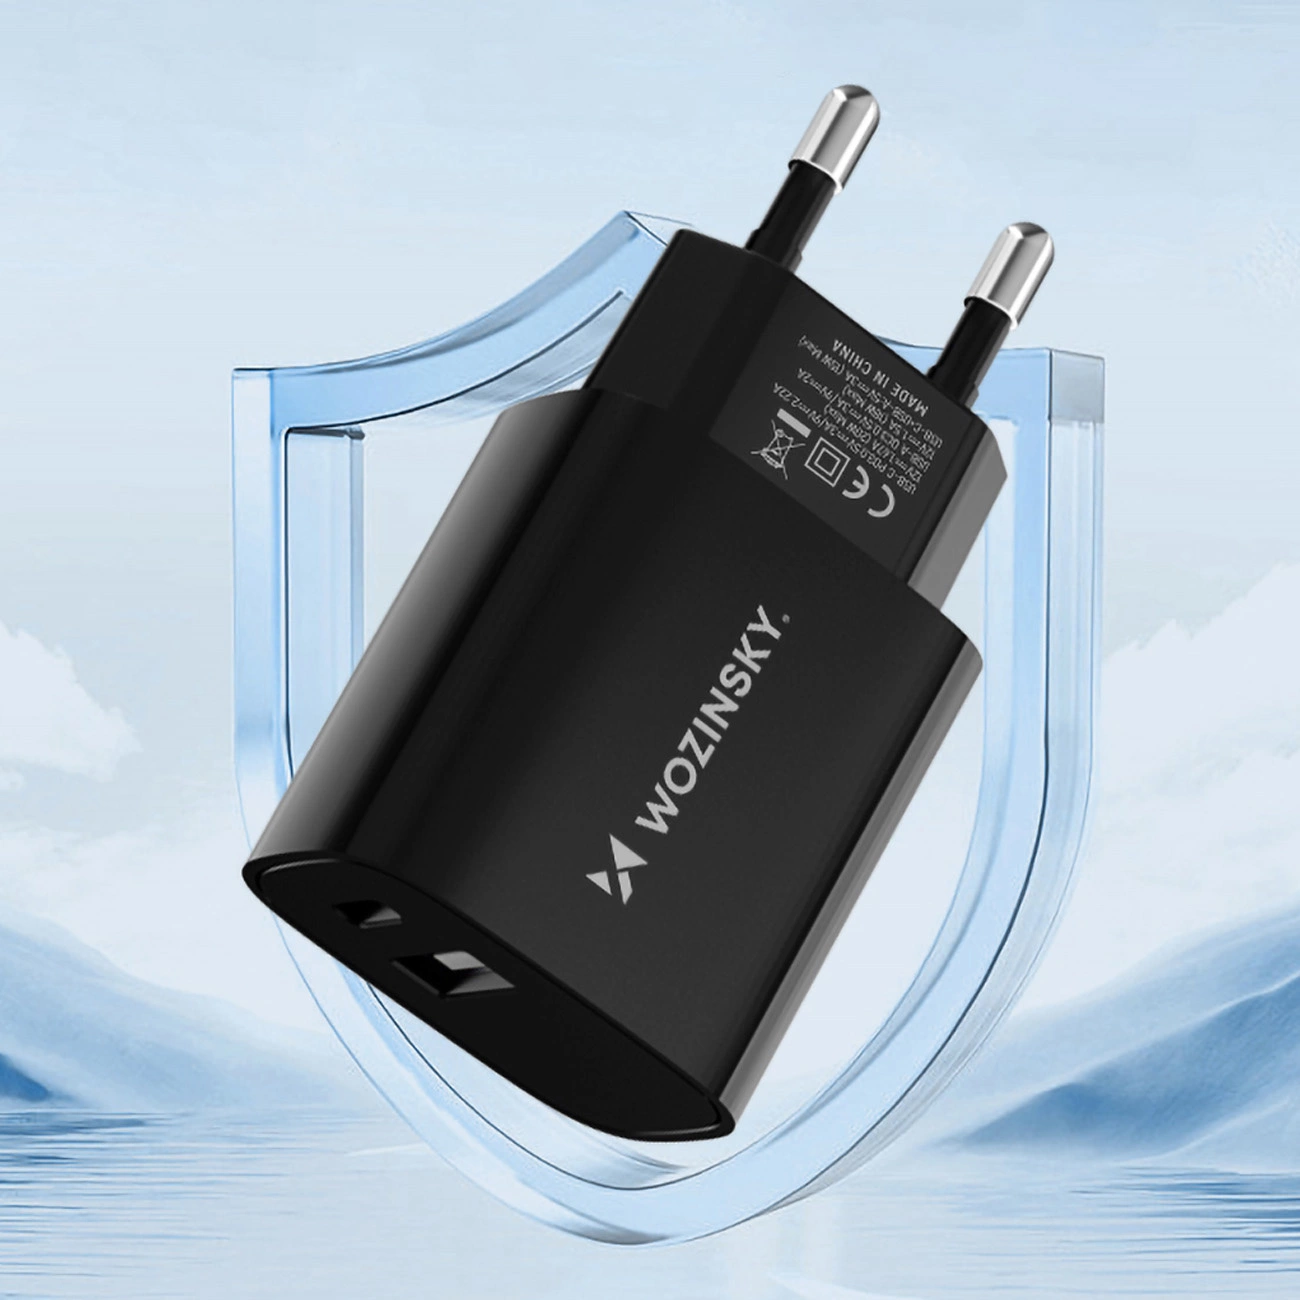 Wozinsky WGWCB wall charger with USB-A and USB-C connectors with a power of up to 20W against the background of mountains